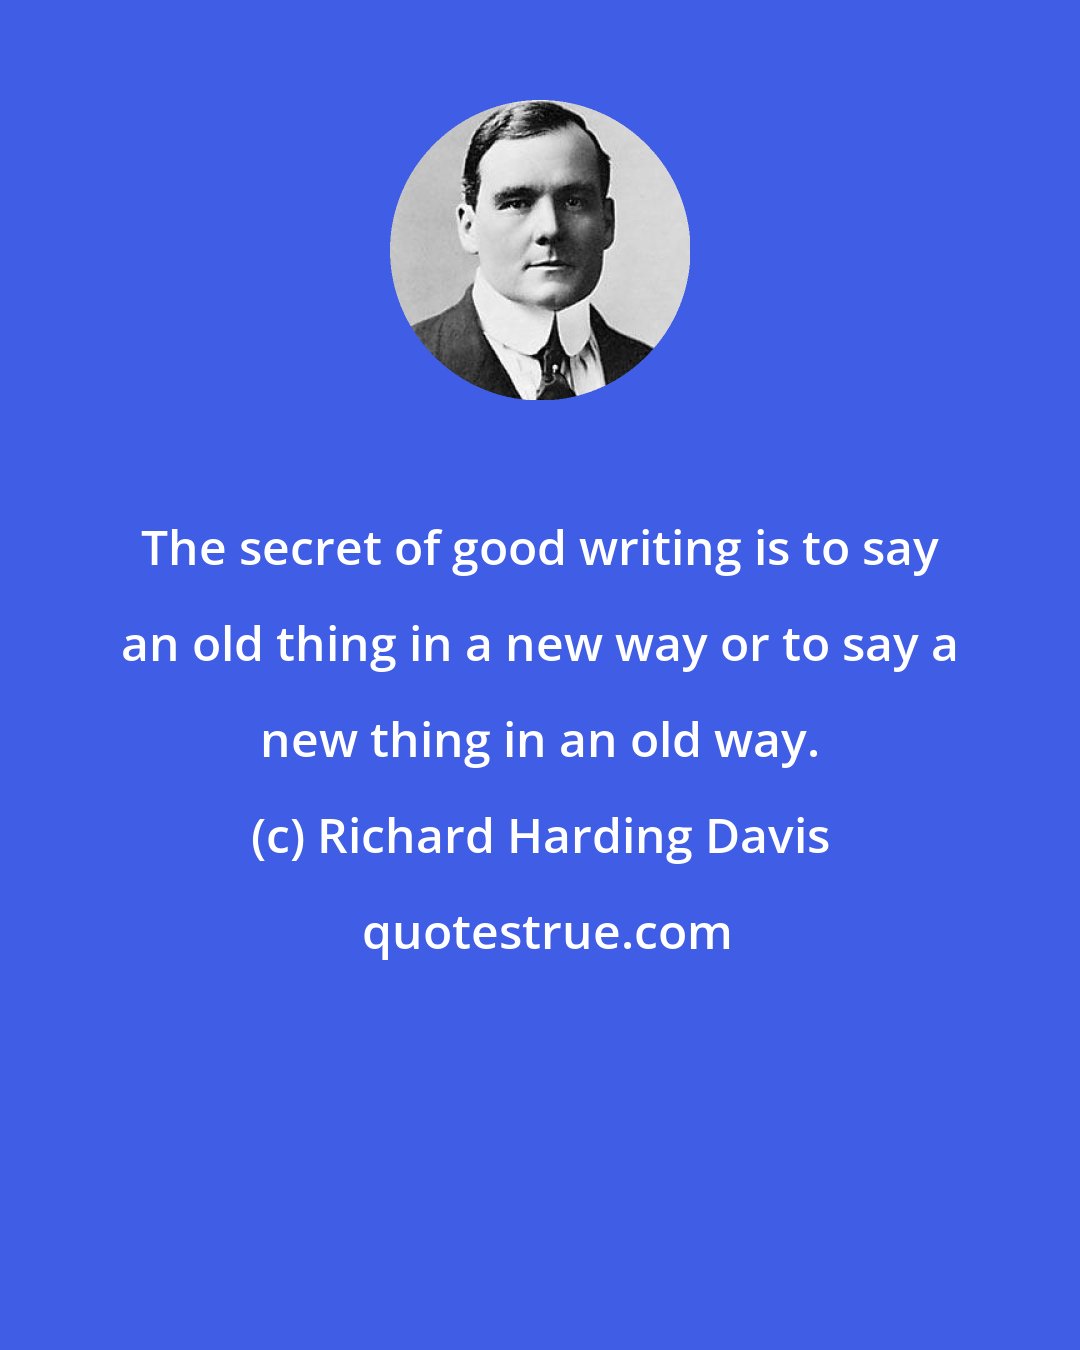 Richard Harding Davis: The secret of good writing is to say an old thing in a new way or to say a new thing in an old way.